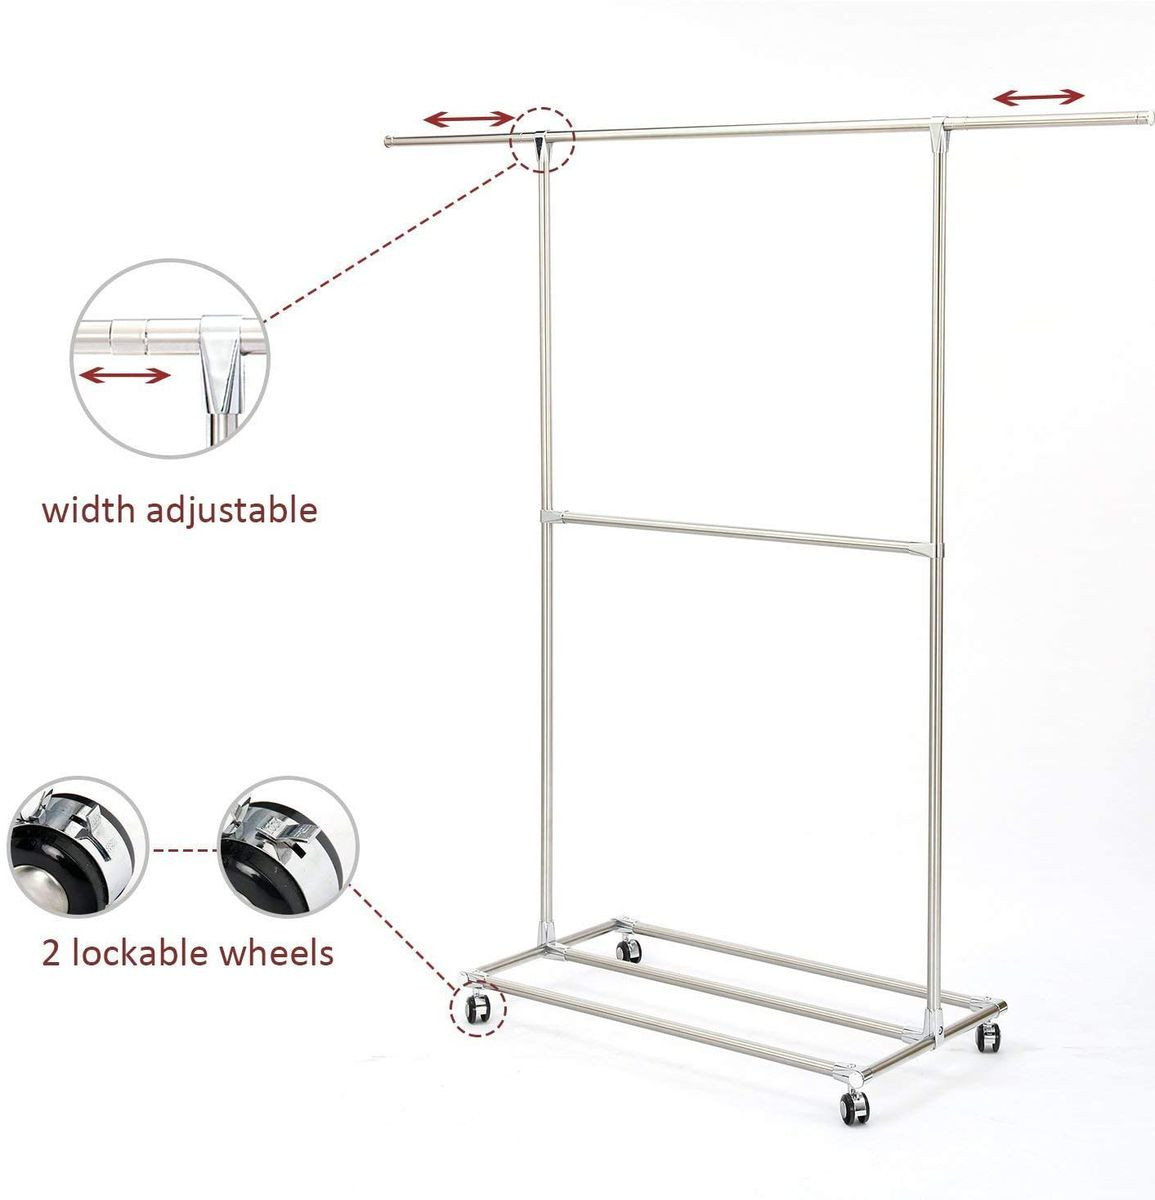 CLOTHES DRYING RACK FOLDABLE LAUNDRY STAND - Lasa Africa